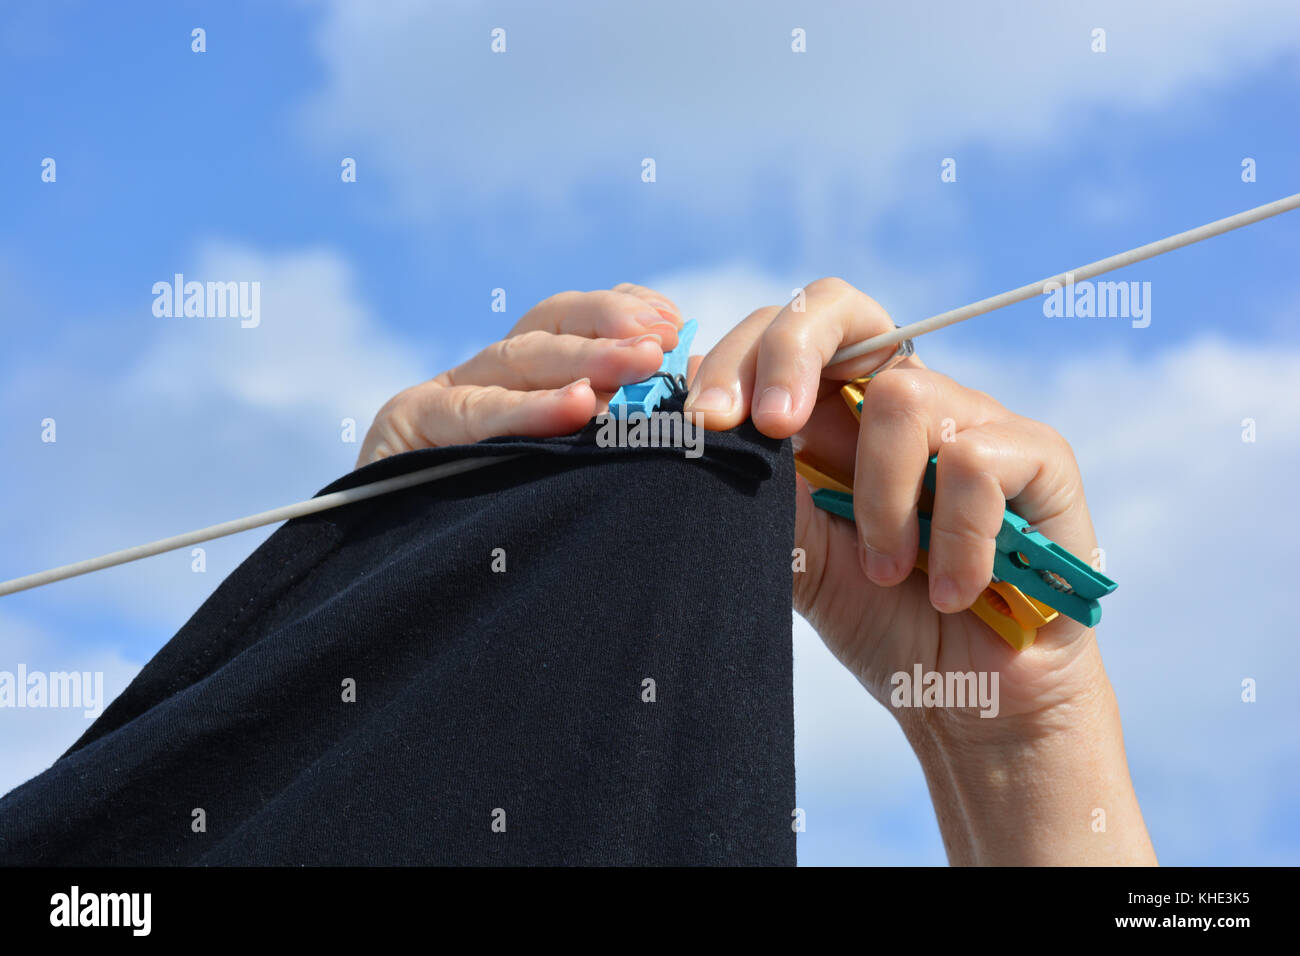 Laundry day. Hanging out the washing on a clothes line outdoors. Stock Photo